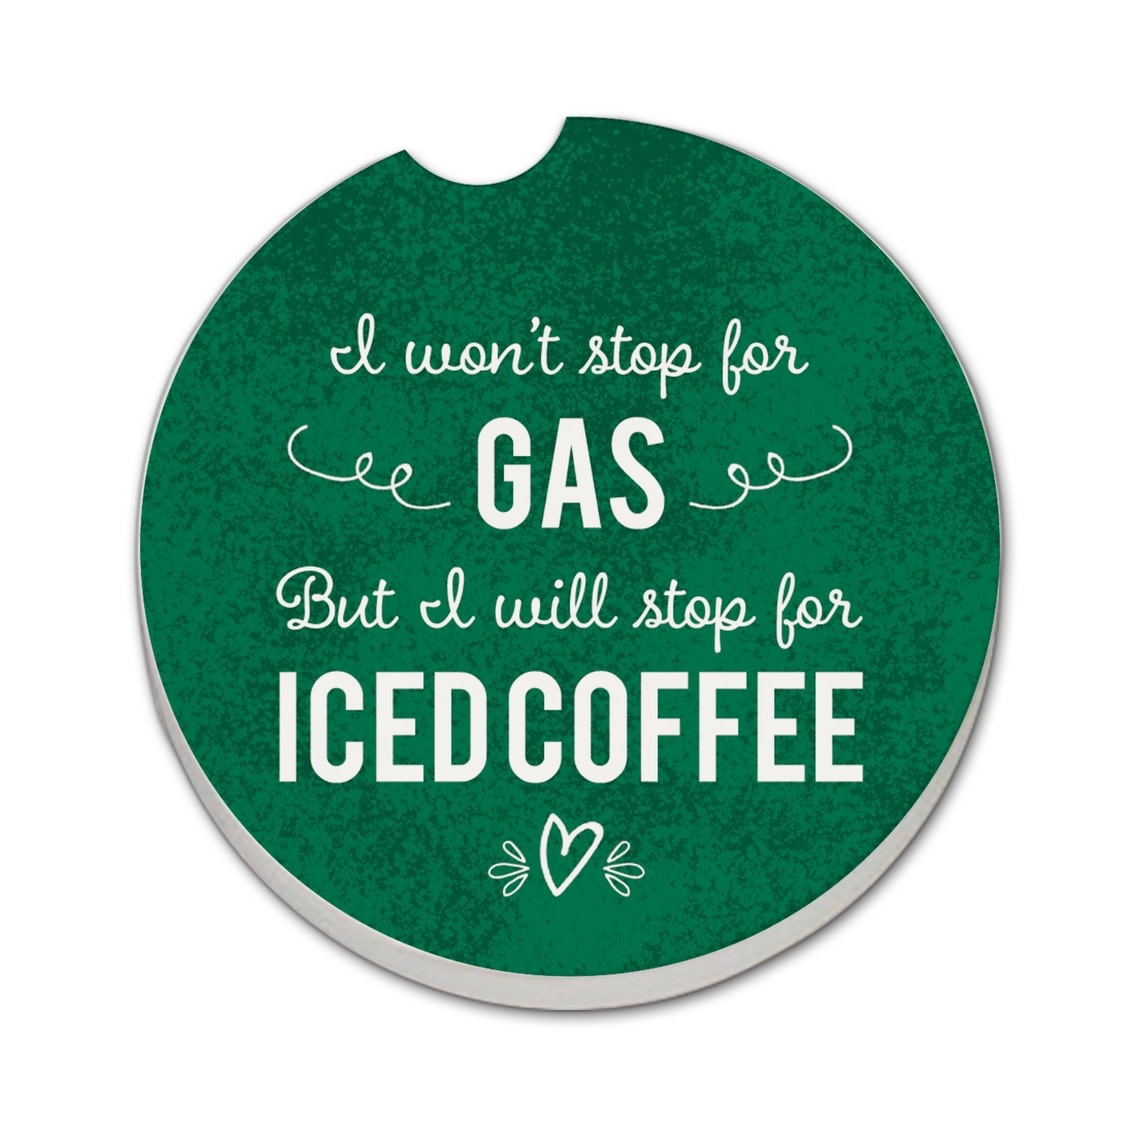 CounterArt and Highland Home "Iced Coffee" Stone Car Coaster